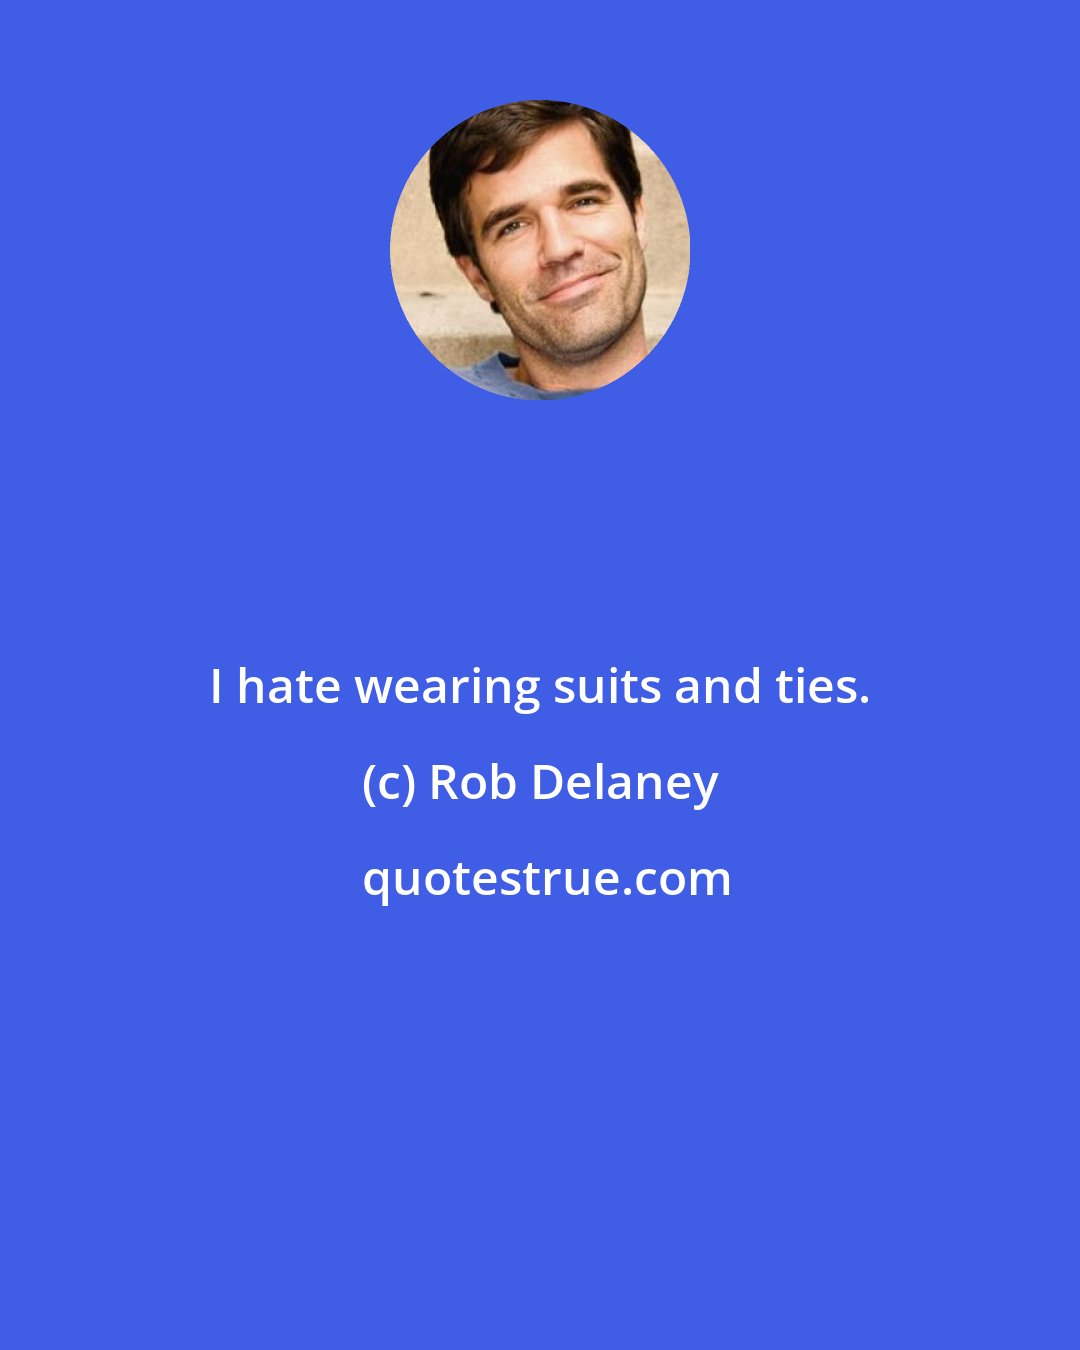 Rob Delaney: I hate wearing suits and ties.